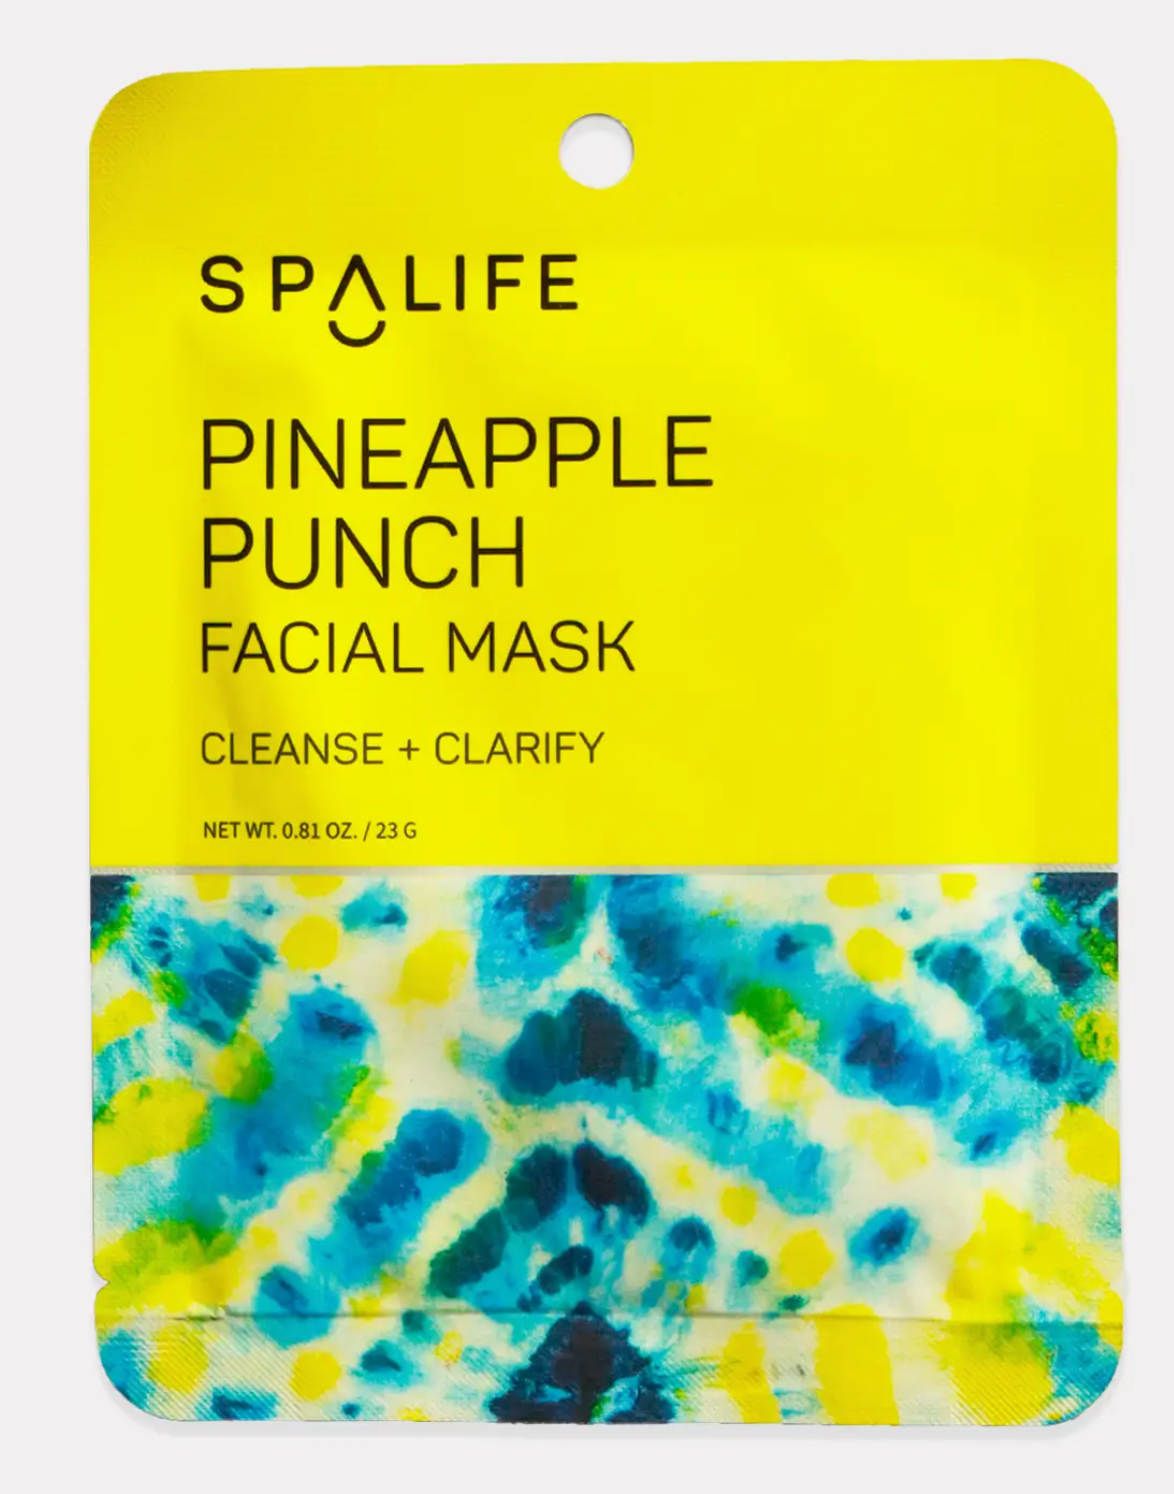 Pineapple Punch Facial Mask